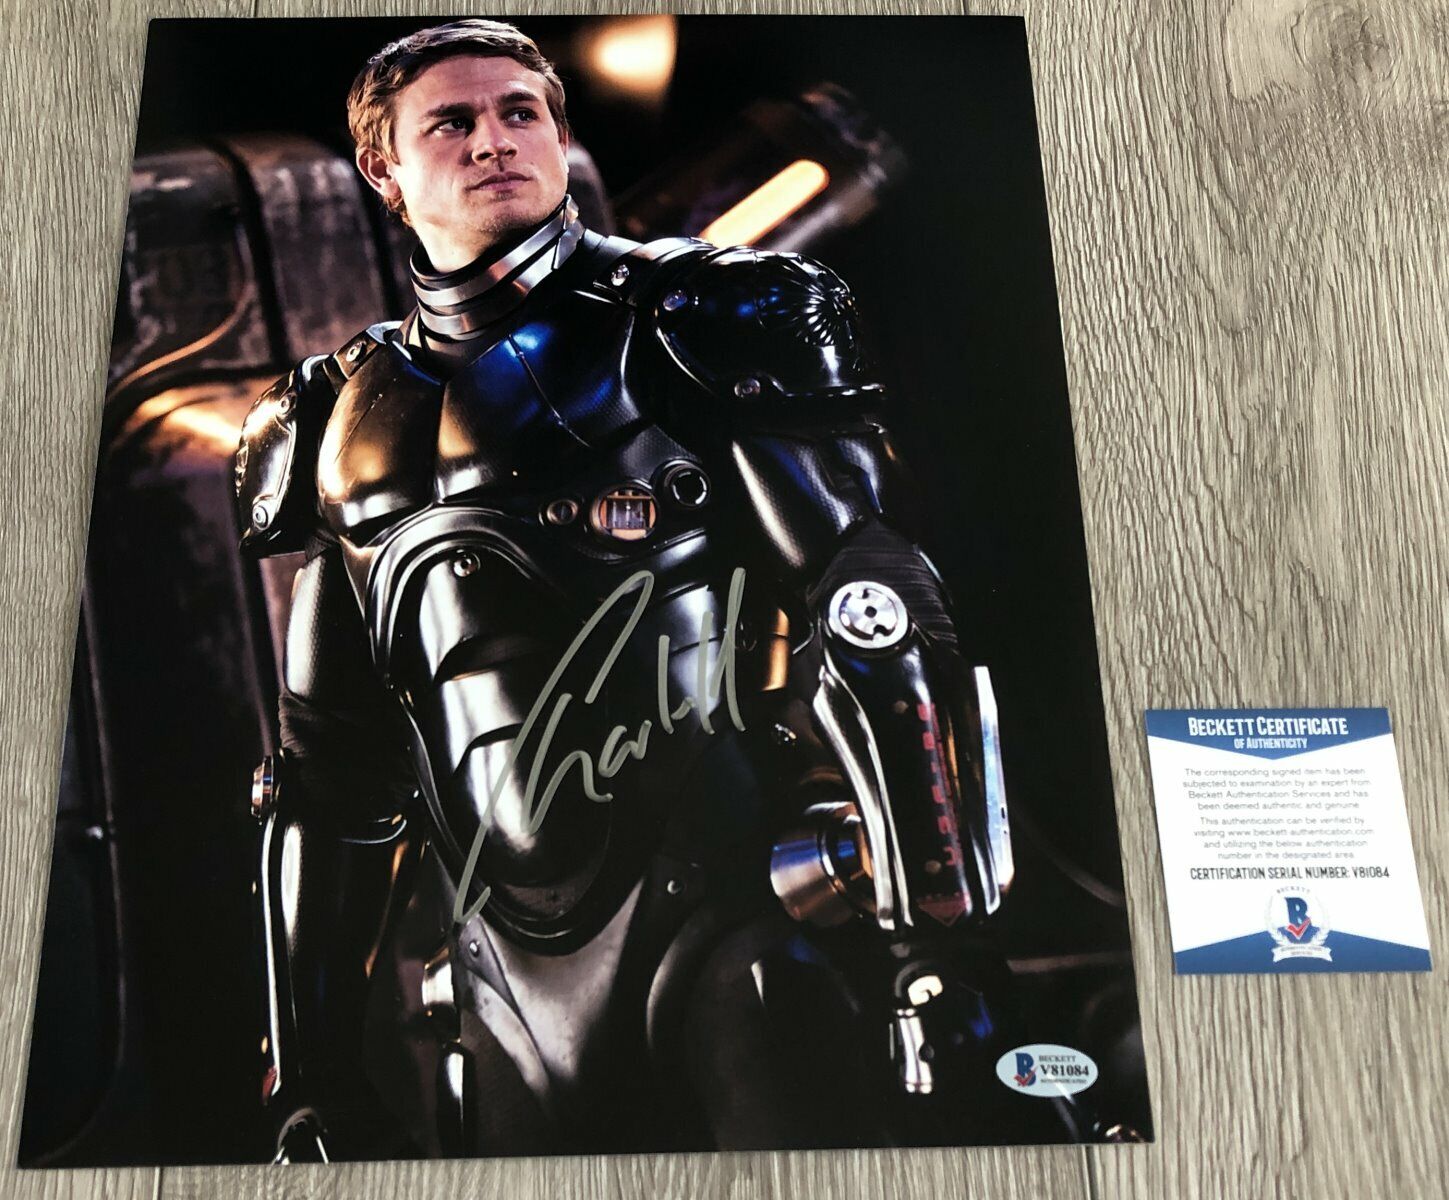 CHARLIE HUNNAM SIGNED AUTOGRAPH PACIFIC RIM 11x14 Photo Poster painting w/PROOF BECKETT BAS COA